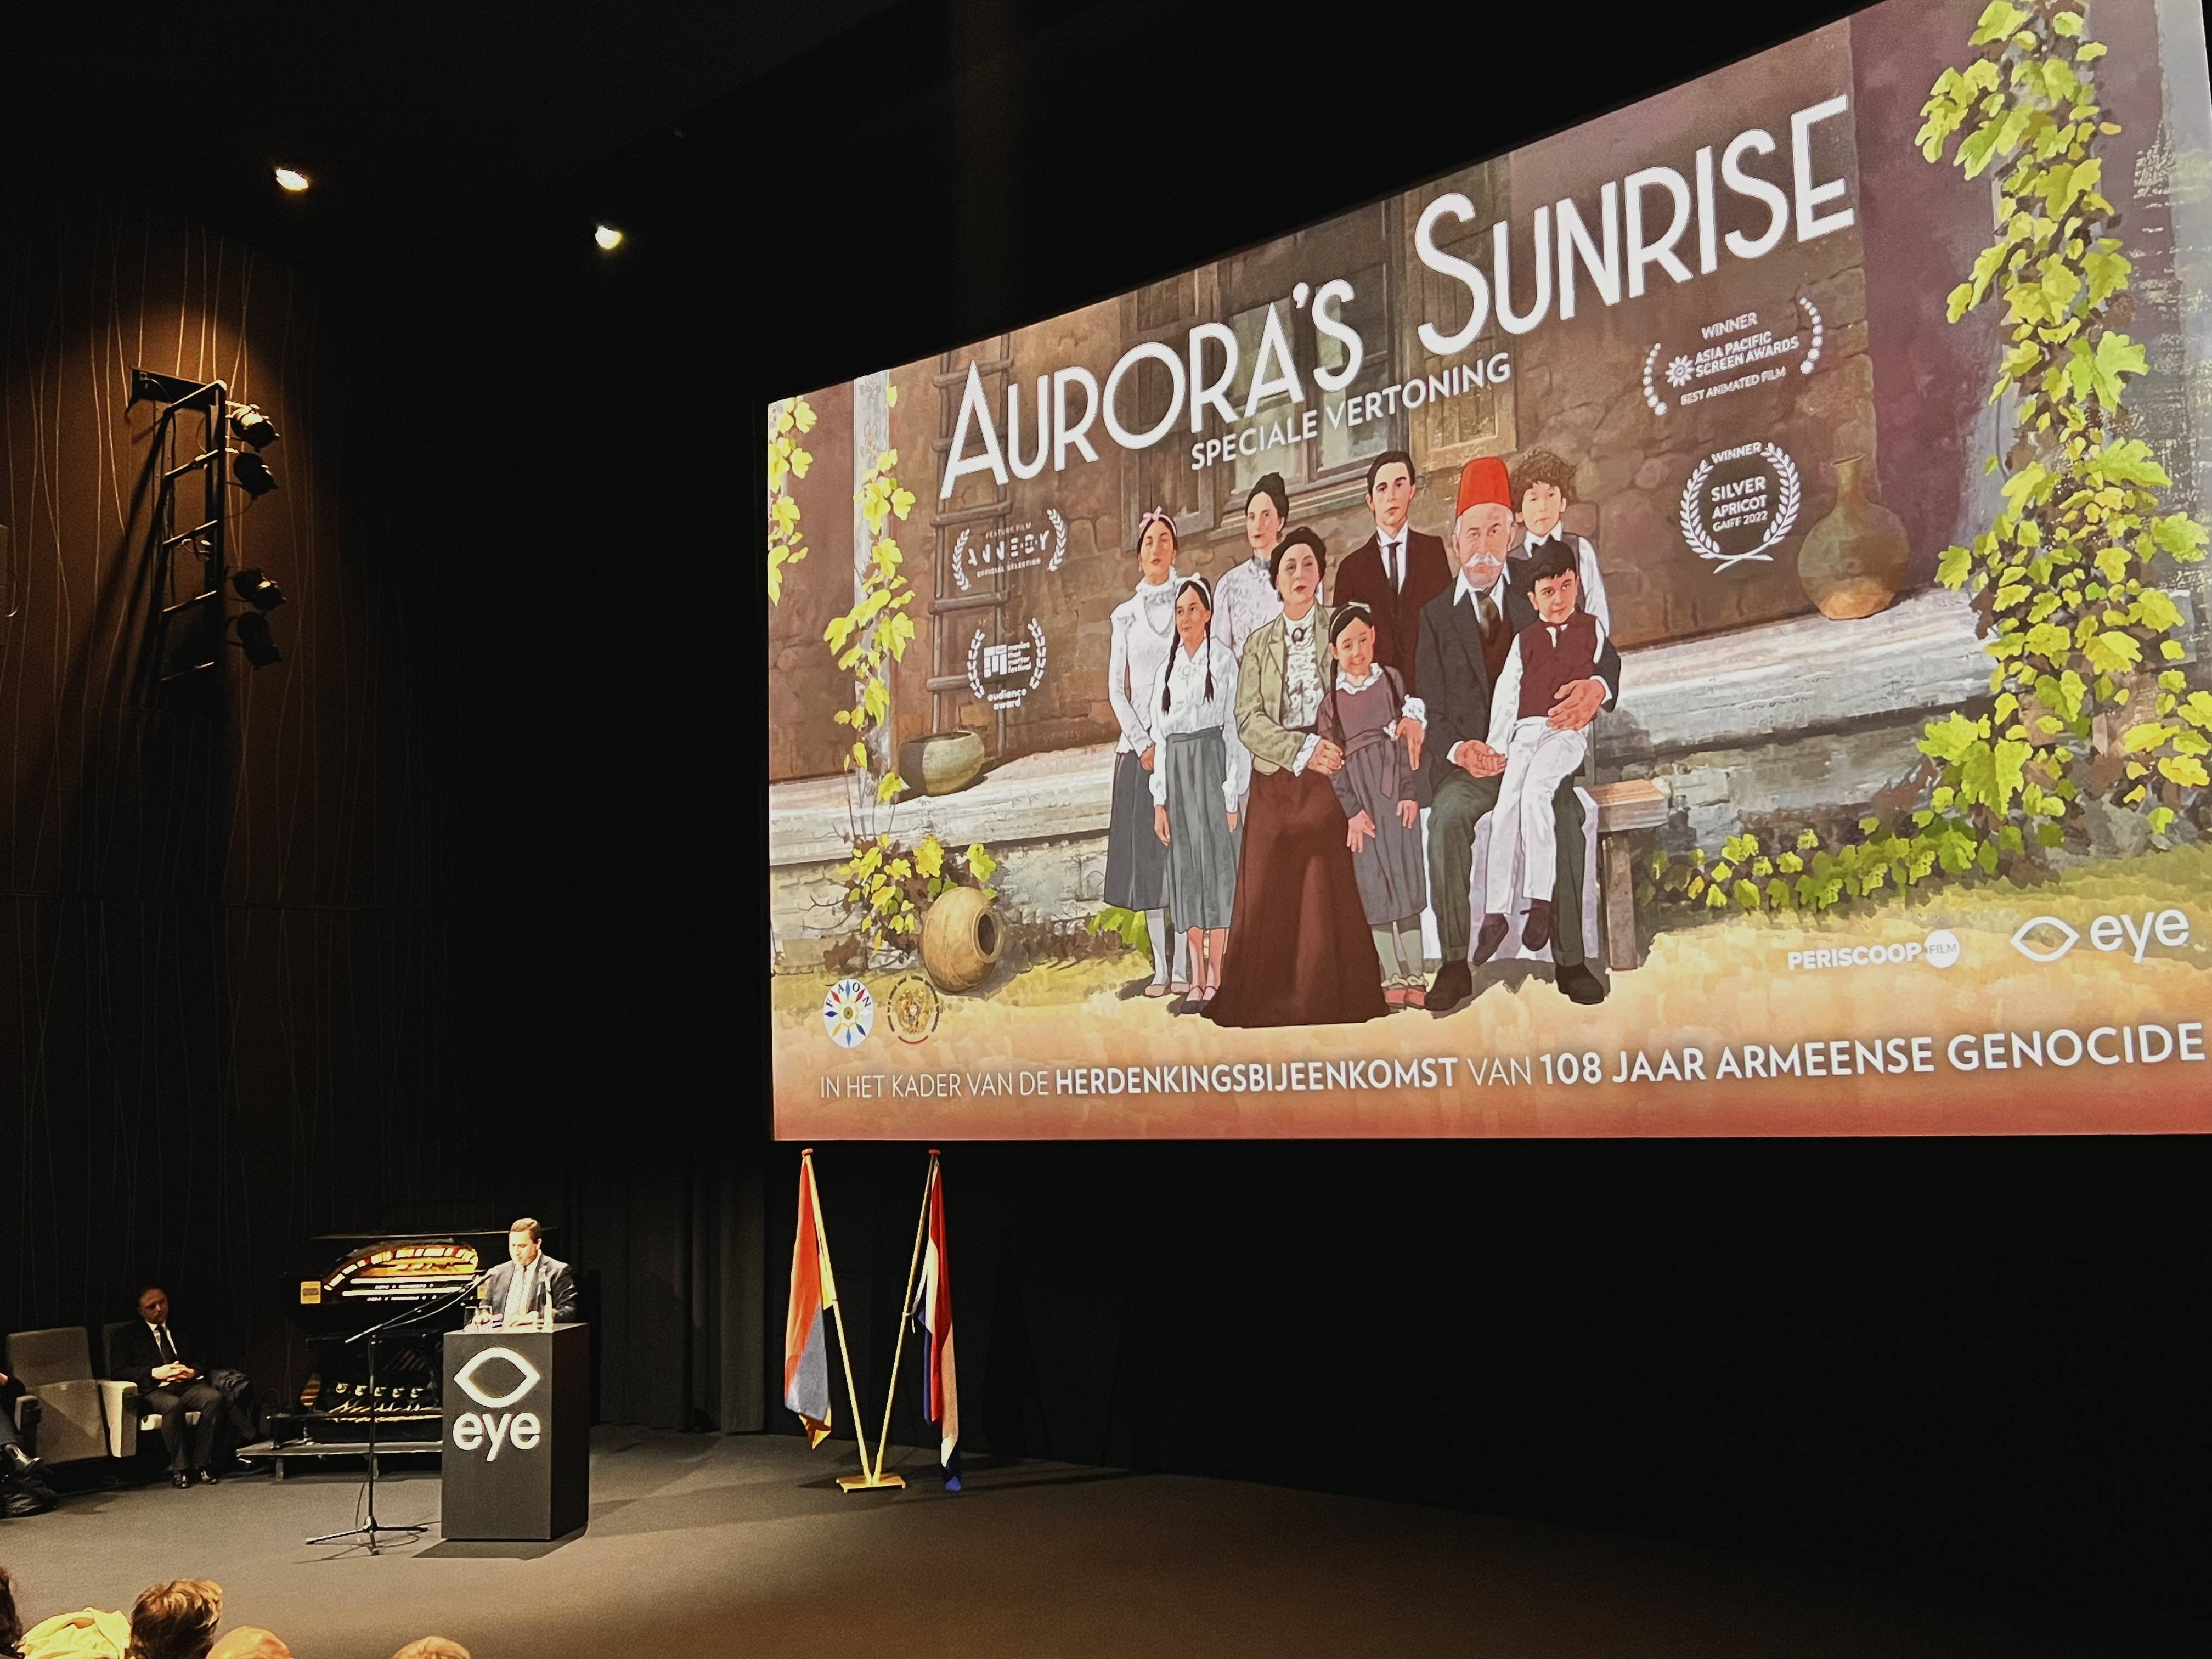 Remarks by the Ambassador Tigran Balayan at the screening of “Aurora’s Sunrise” film on the occasion of 108th commemoration of the Armenian Genocide